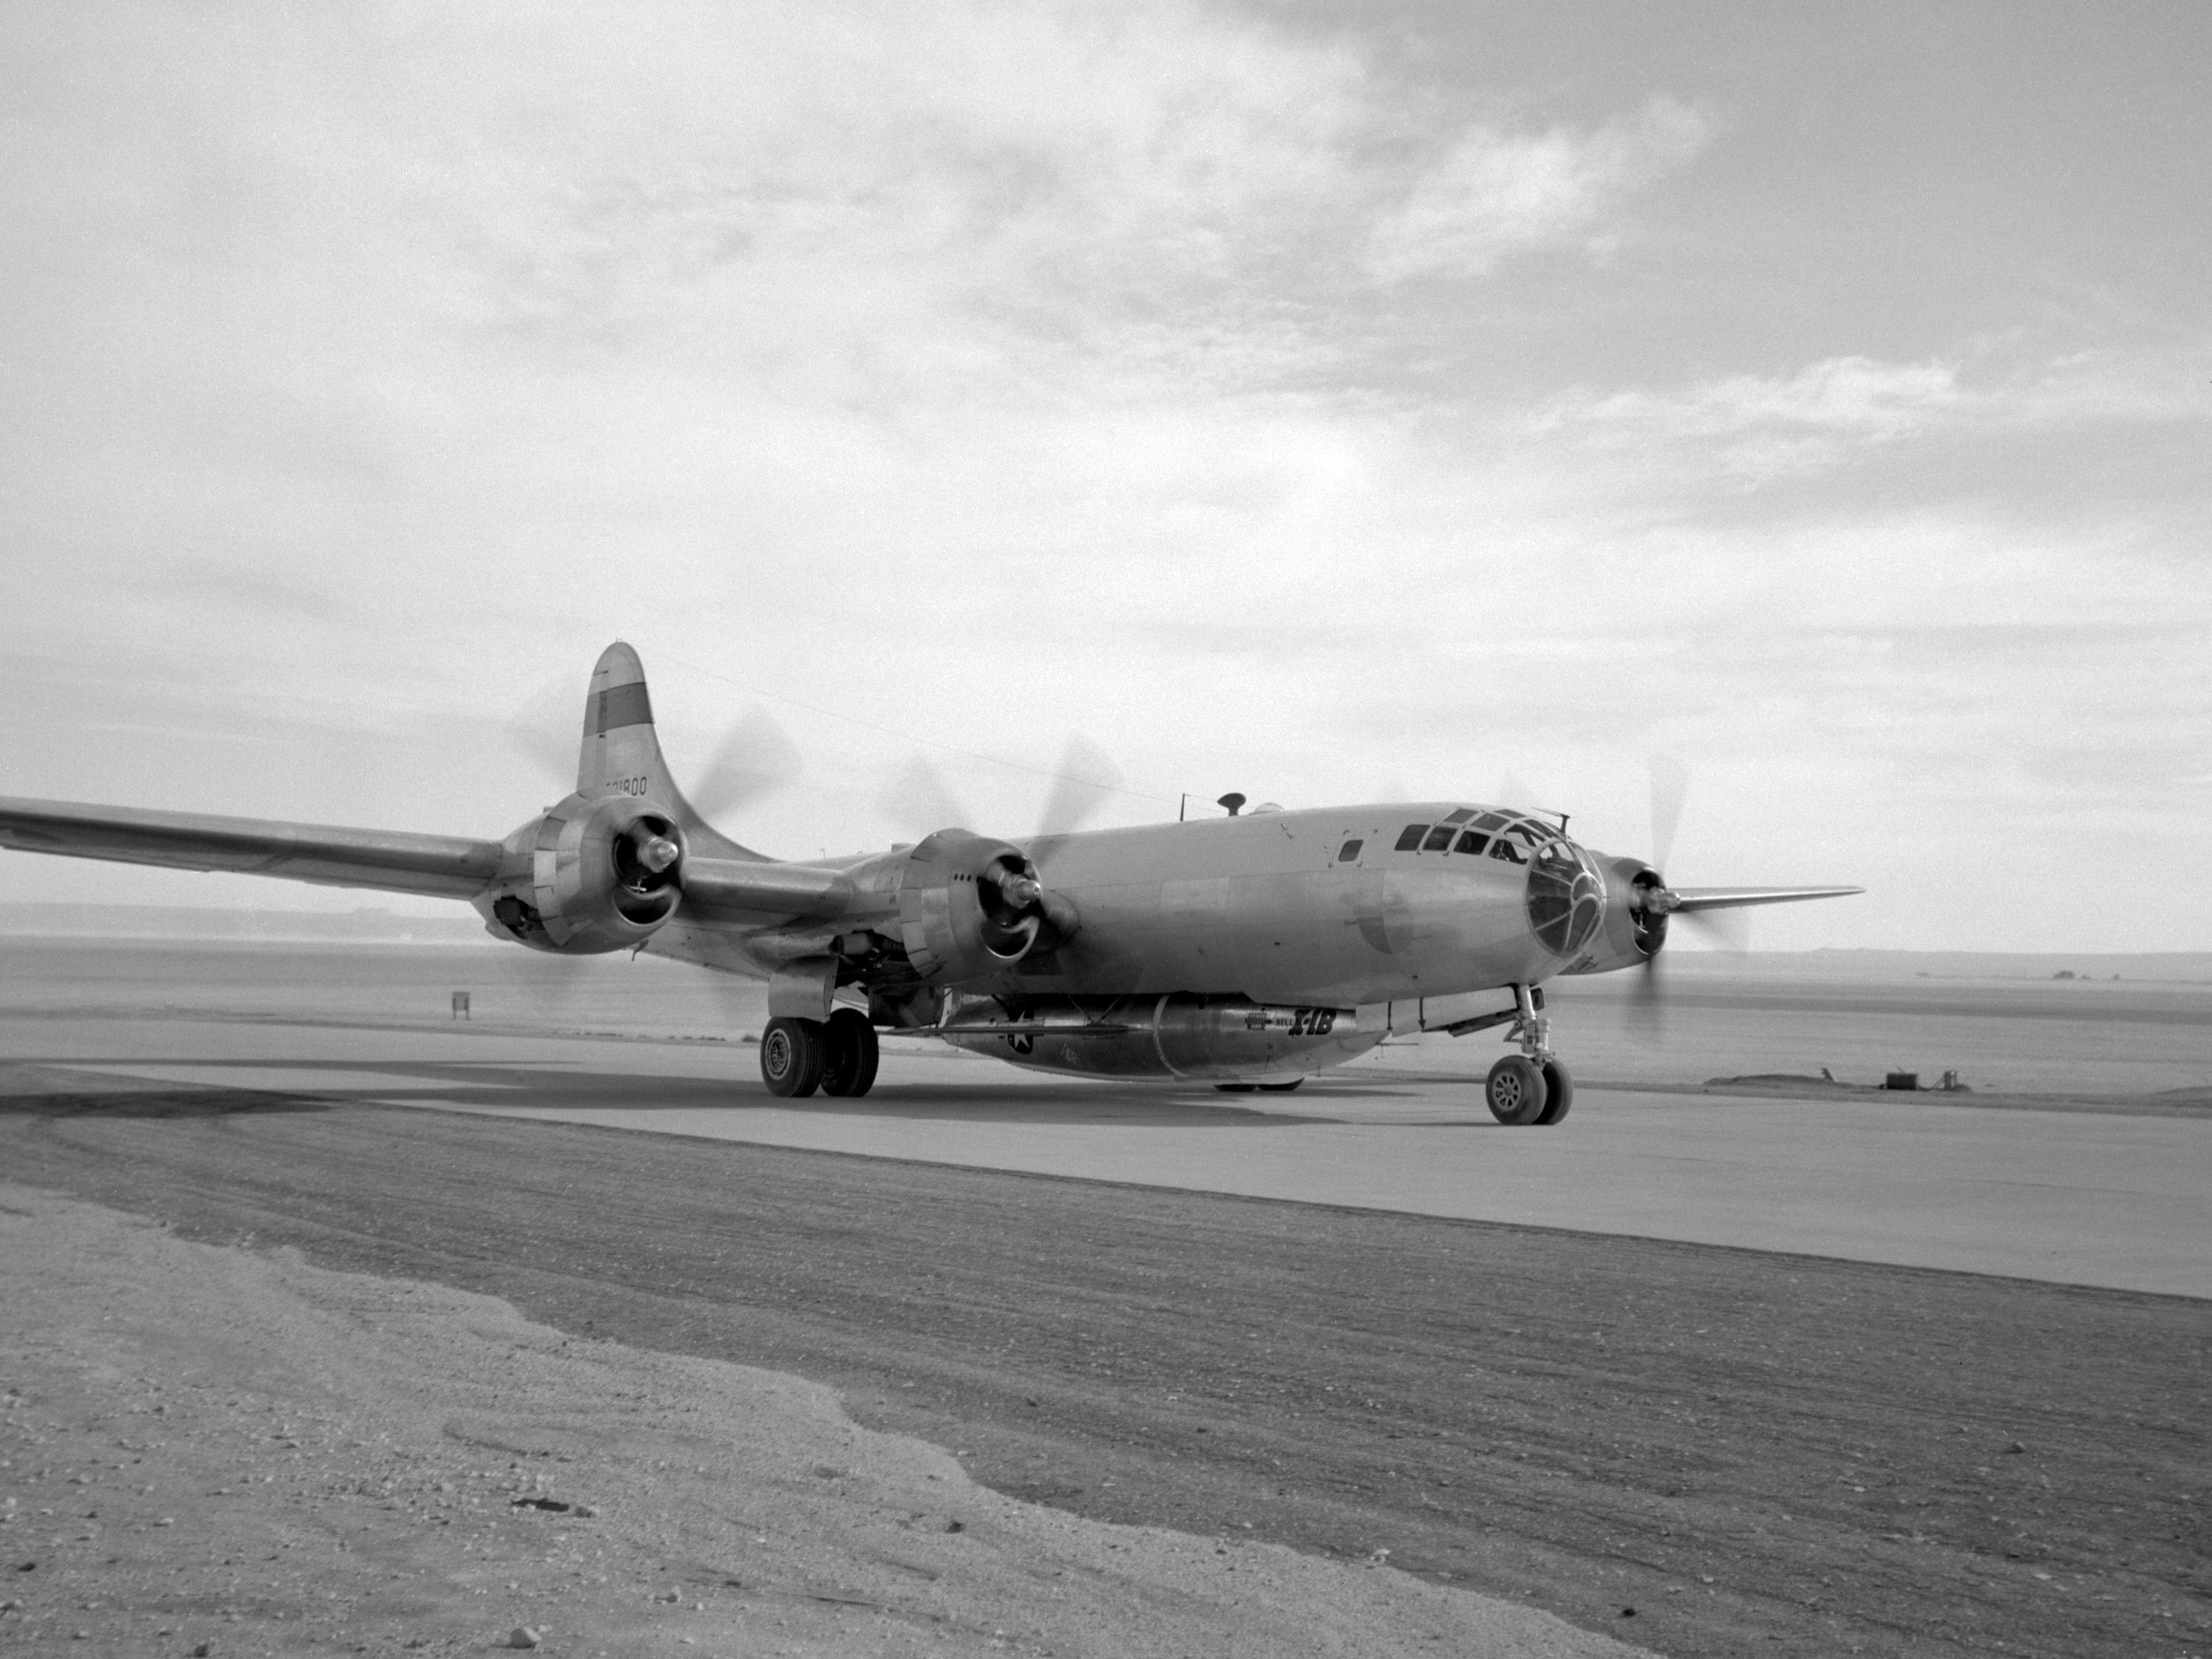 Boeing b-29 Superfortress